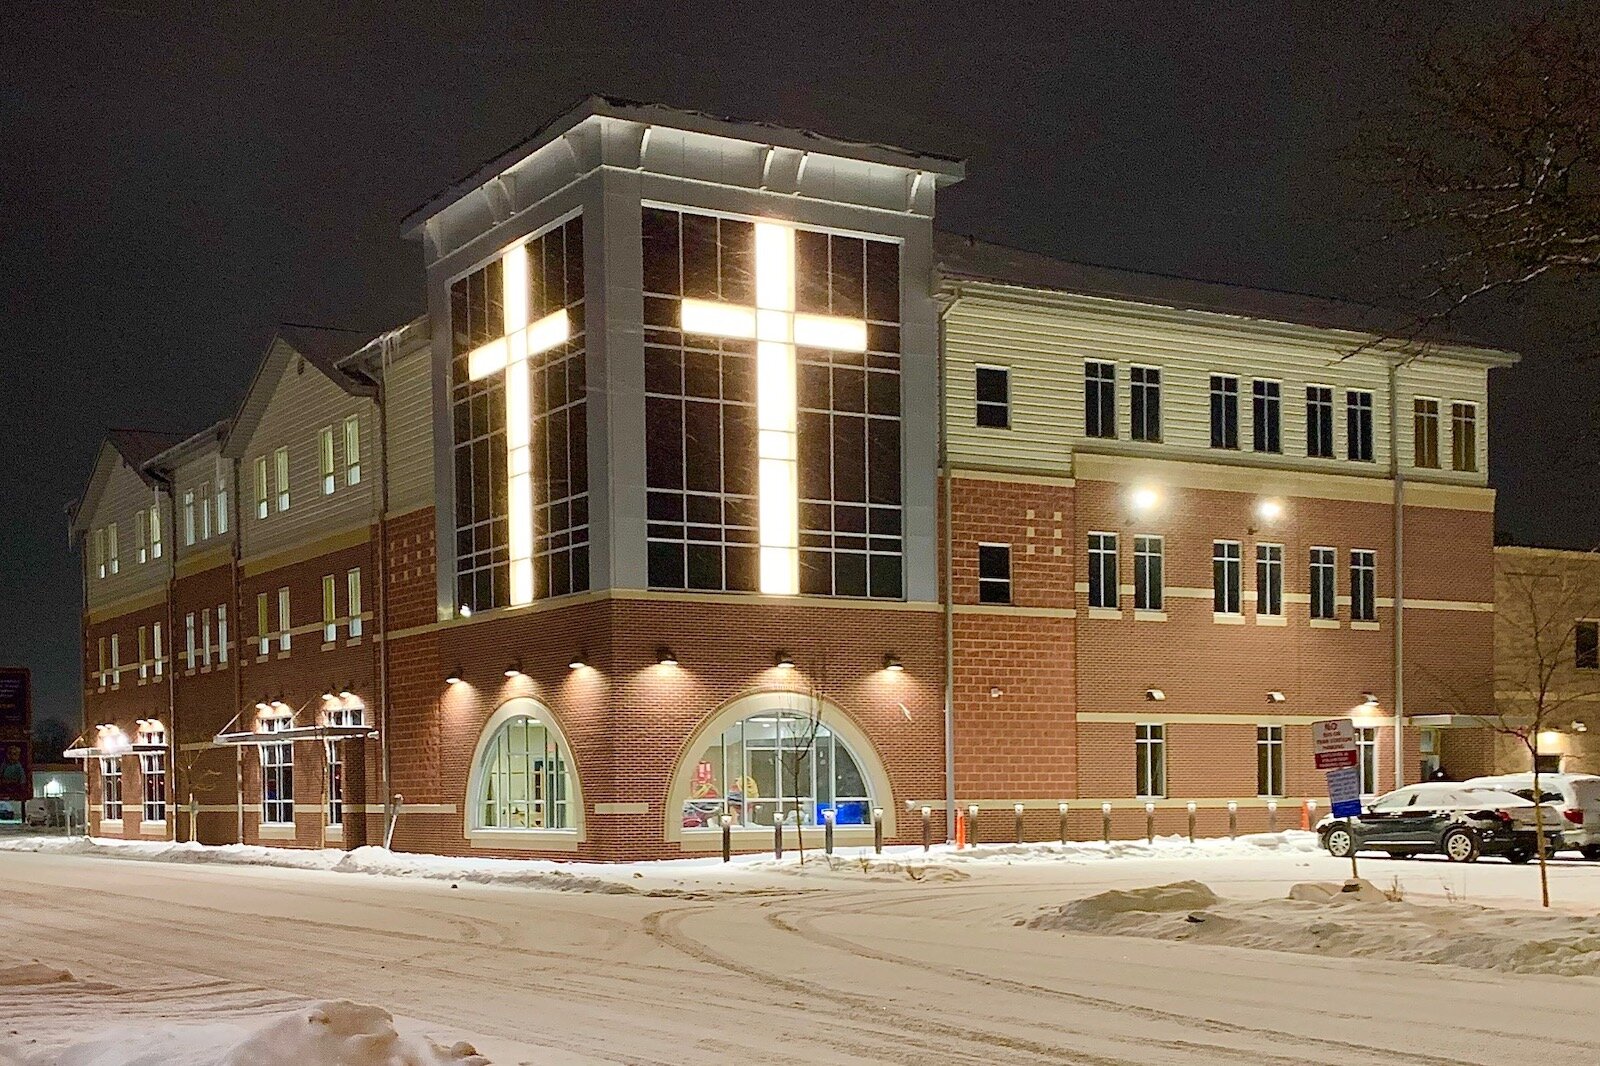 Huge crosses mark the new women and children’s shelter on the downtown campus of the Kalamazoo Gospel Mission.